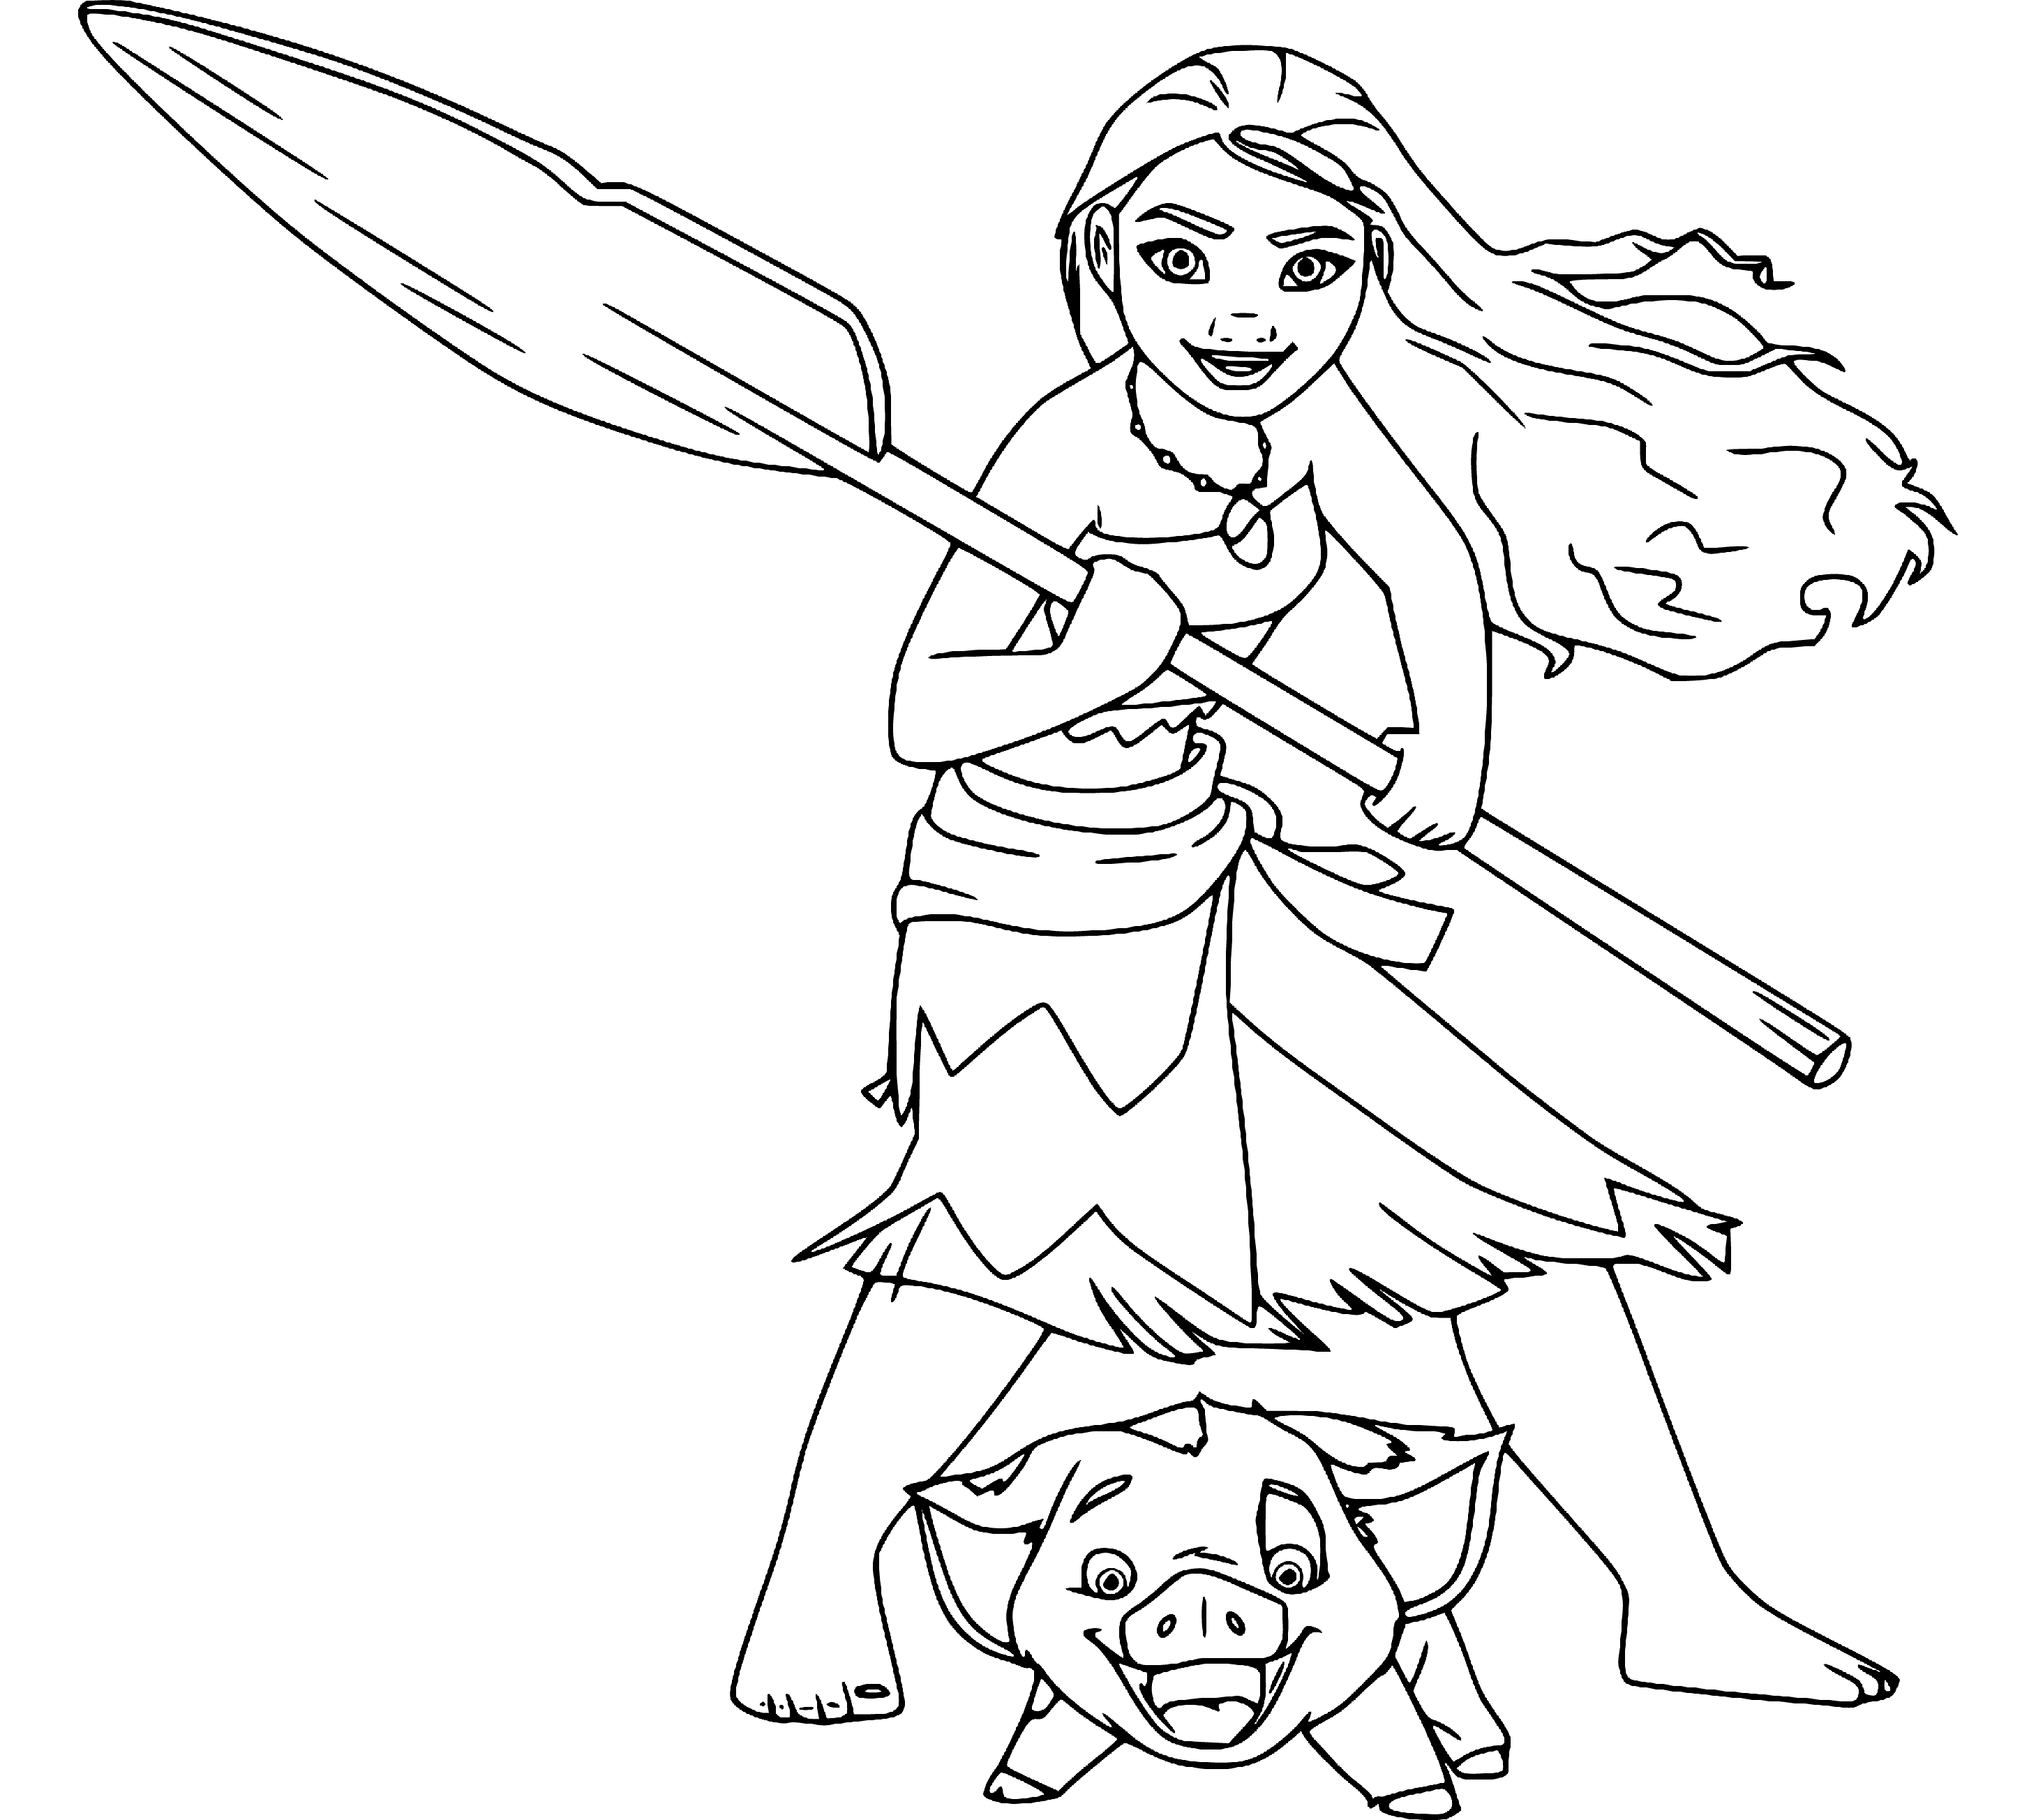 Moana and Pua the Pig Coloring Page for Kids - SheetalColor.com